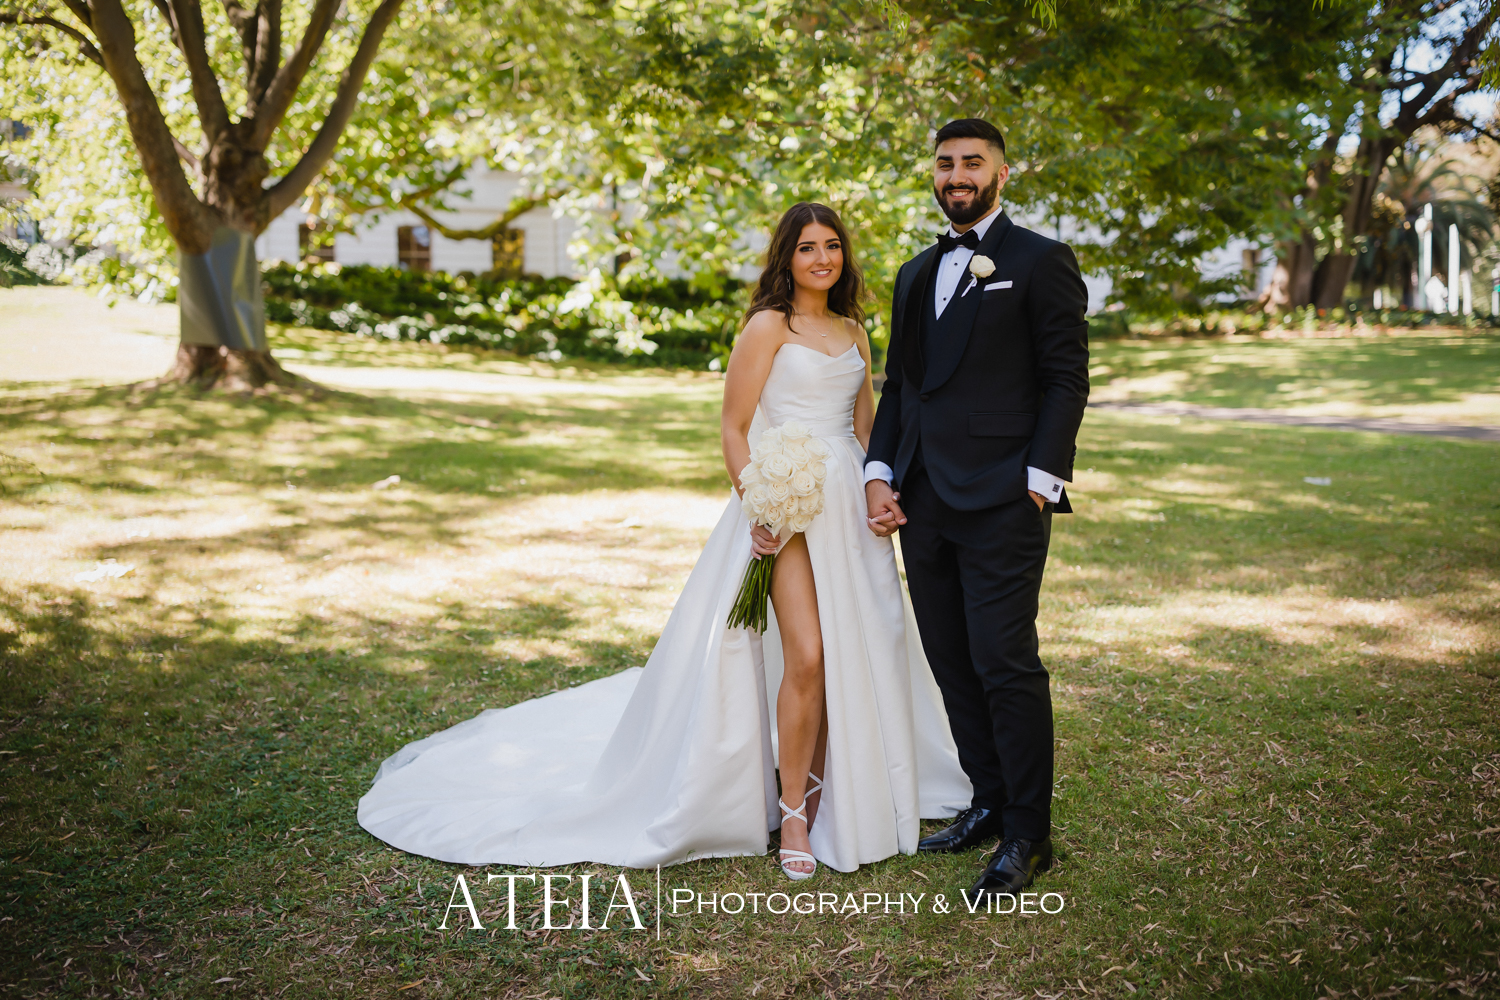 , Stefanie &#038; Terry&#8217;s wedding photography at Vogue Ballroom captured by ATEIA Photography &#038; Video